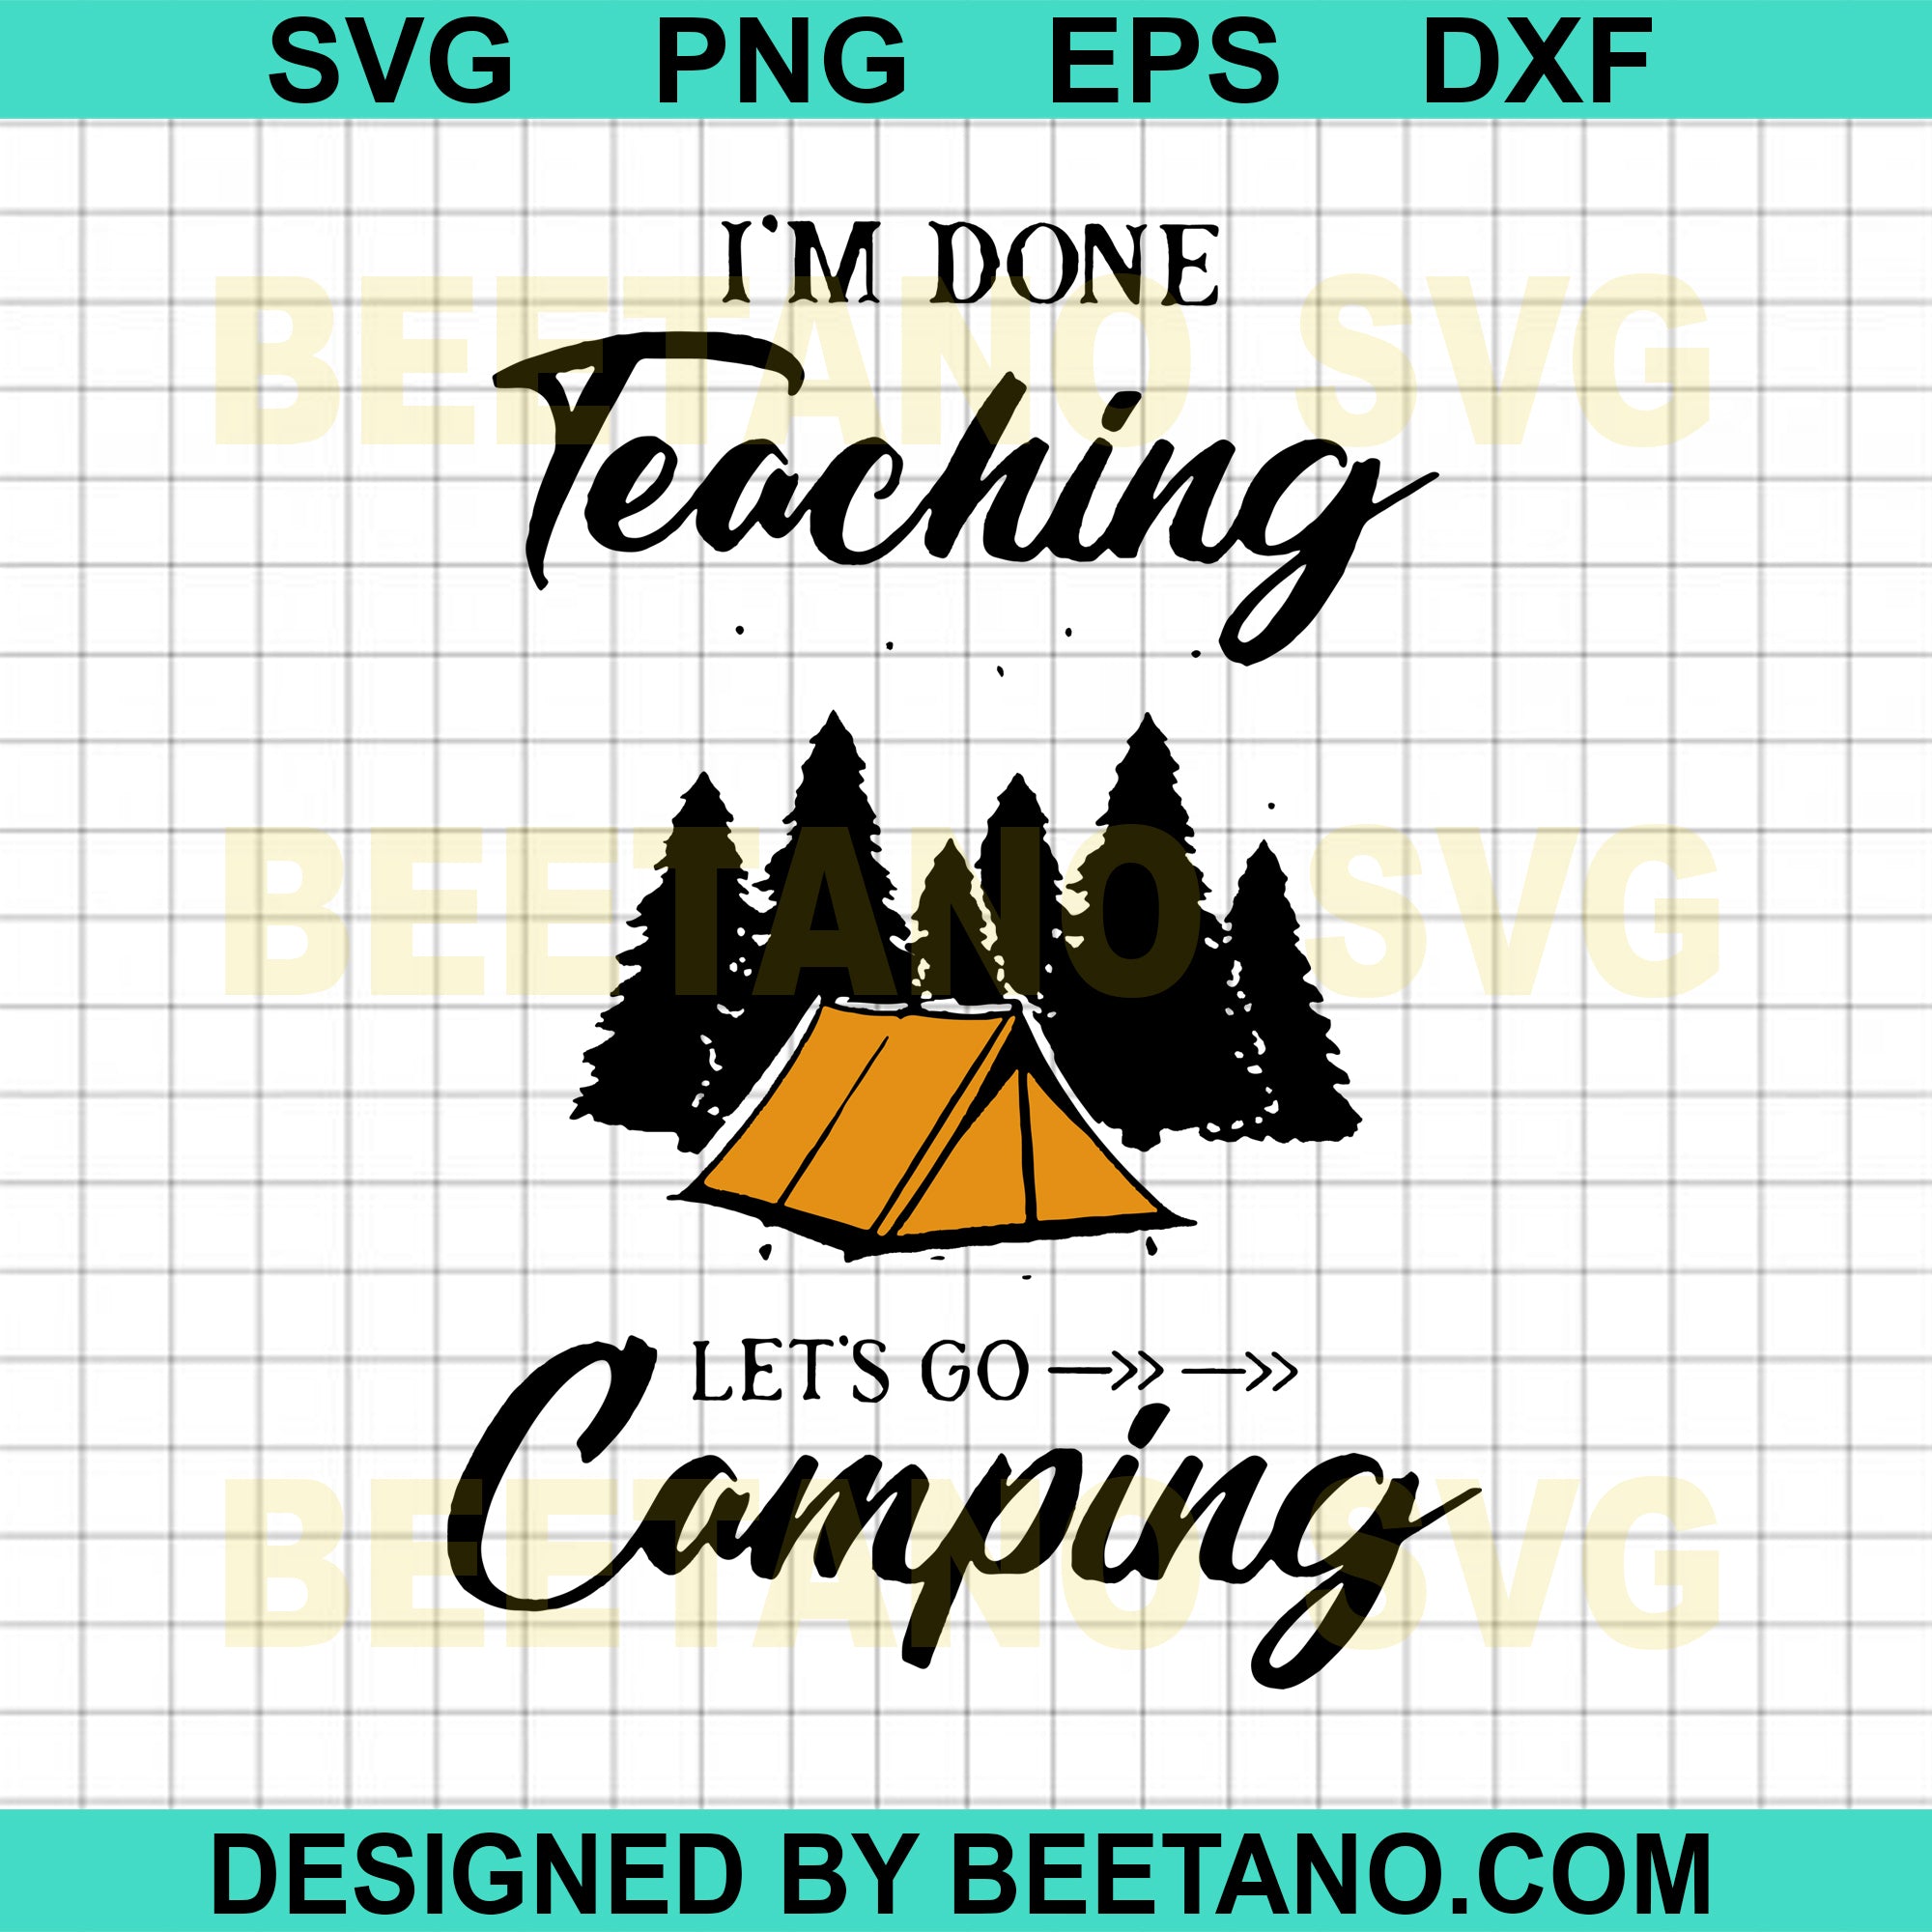 I M Done Teaching Lets Go Camping High Quality Svg Dxf Eps Png Cut Files For Craft Download Beetanosvg Scalable Vector Graphics